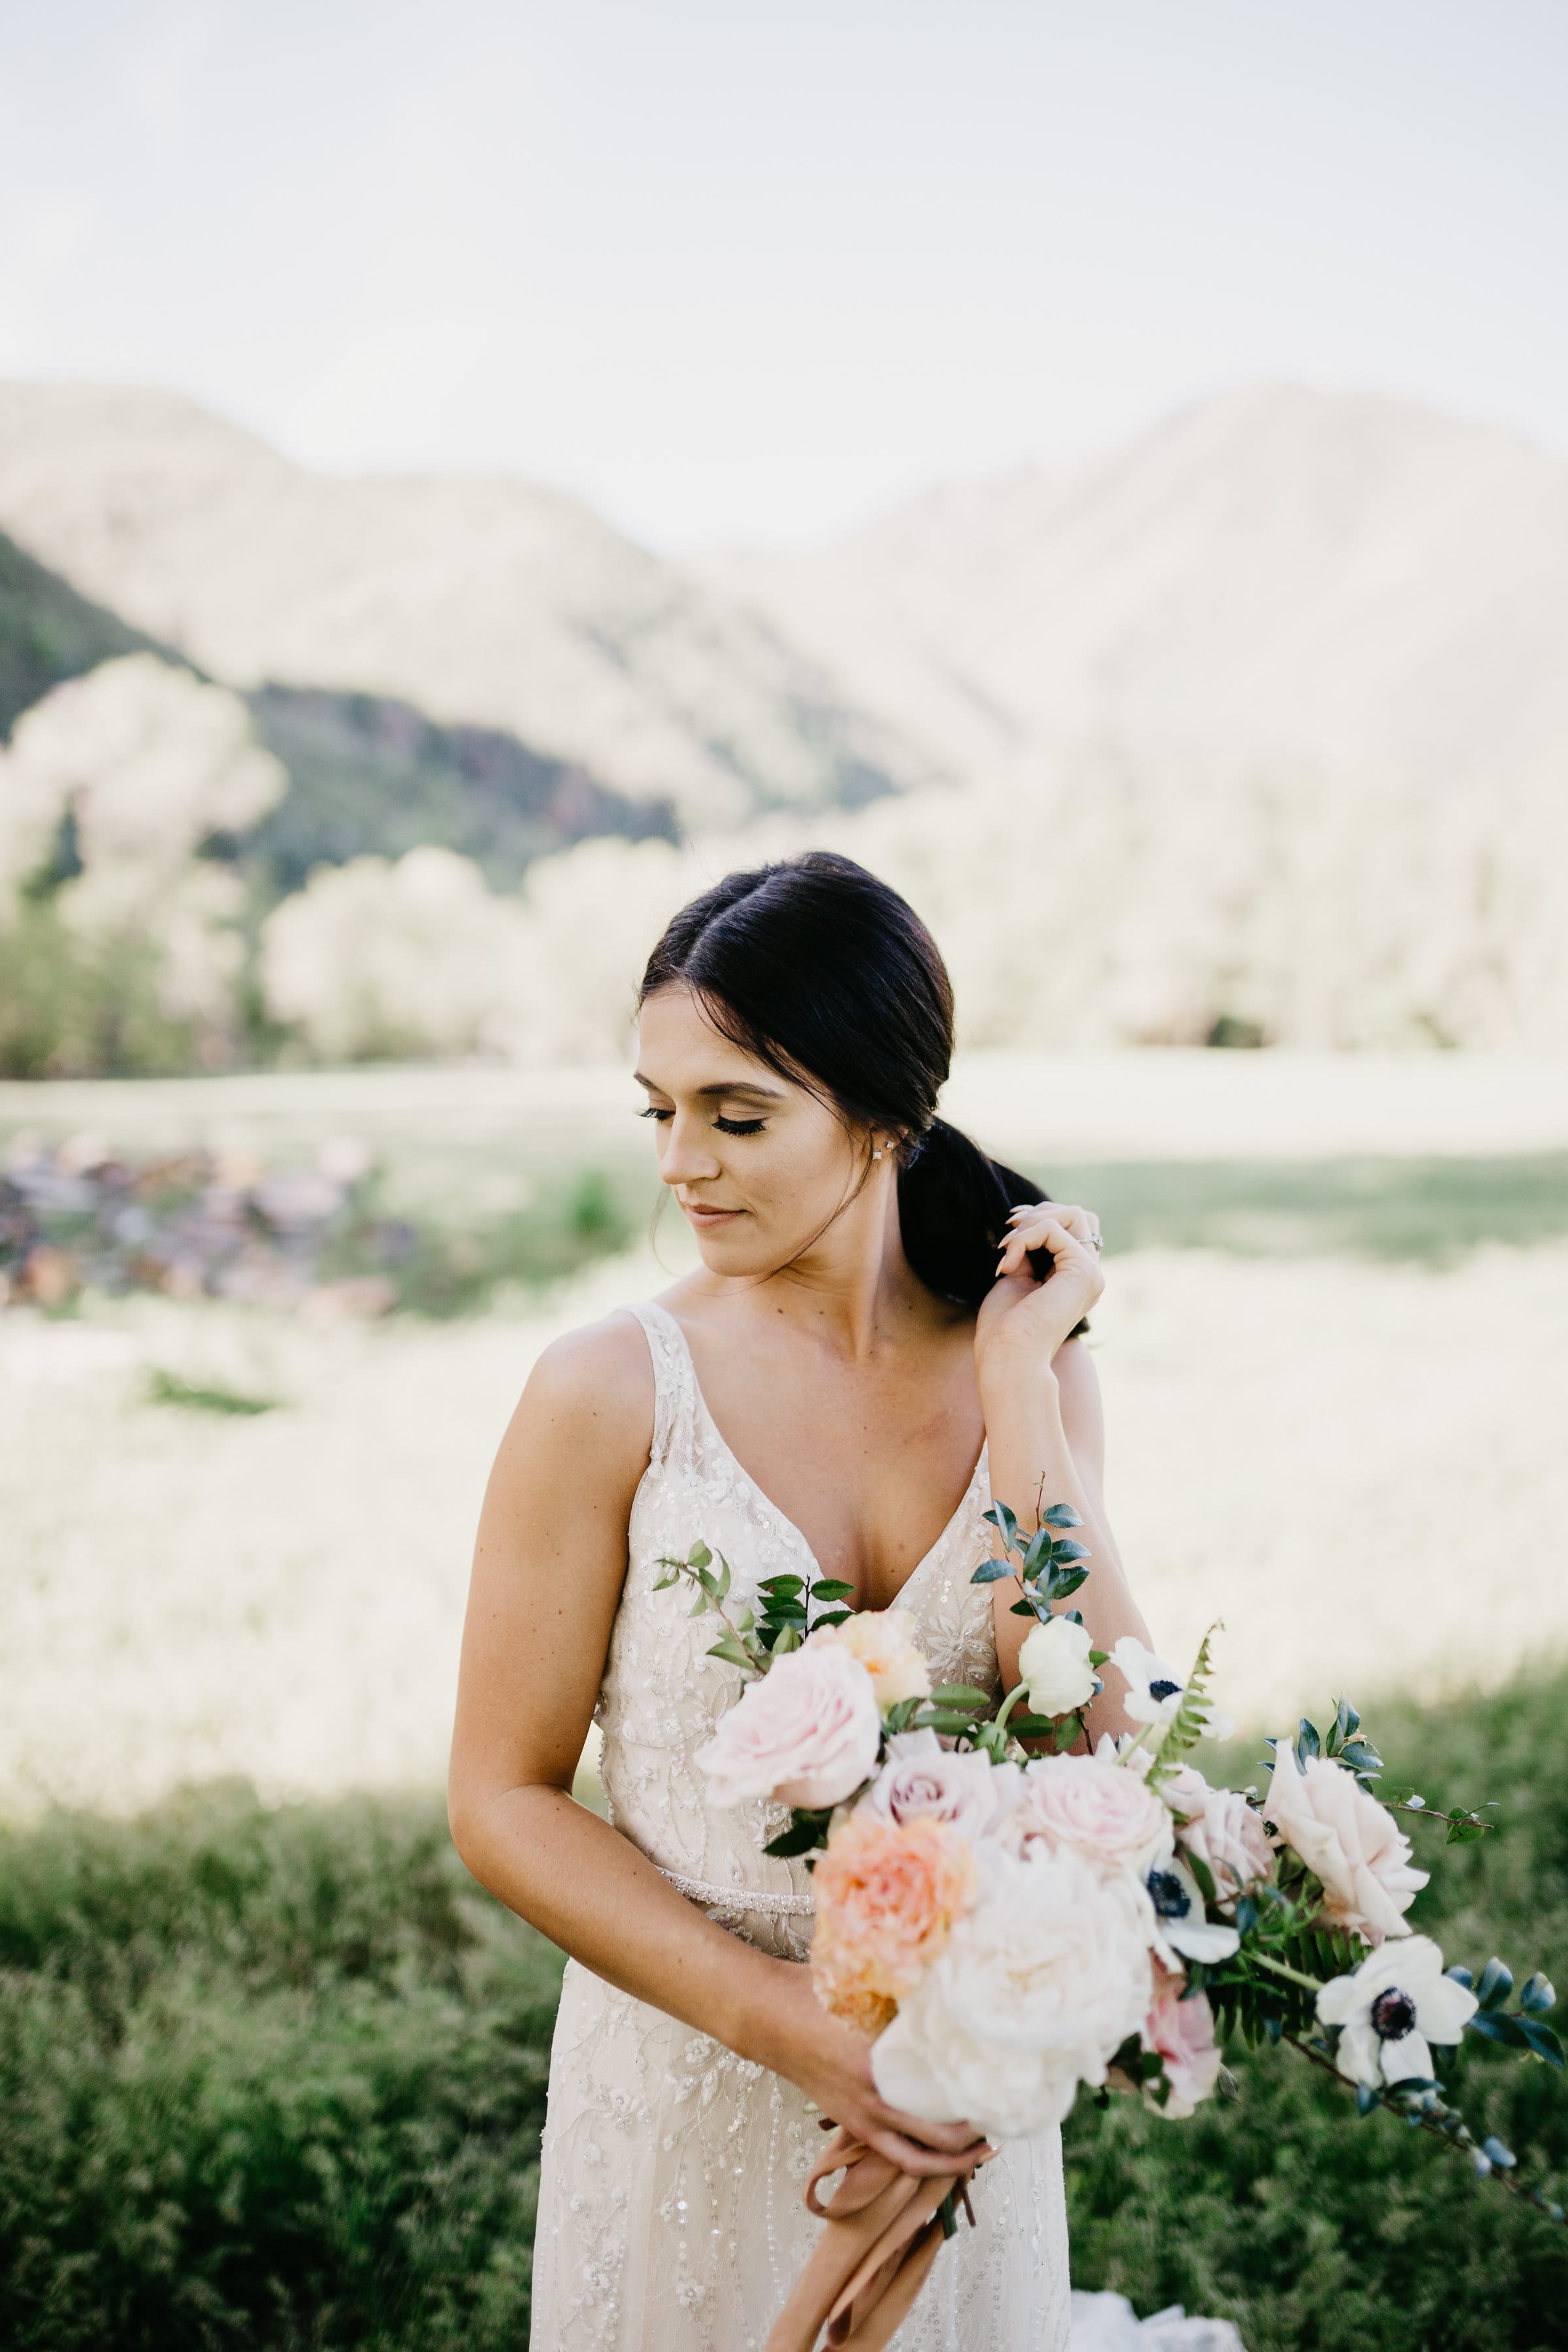 Maggie Sottero's Jorie wedding dress featuring in an Earthy and Romantic Styled Shoot with Breathtaking Florals in Outdoor Wedding